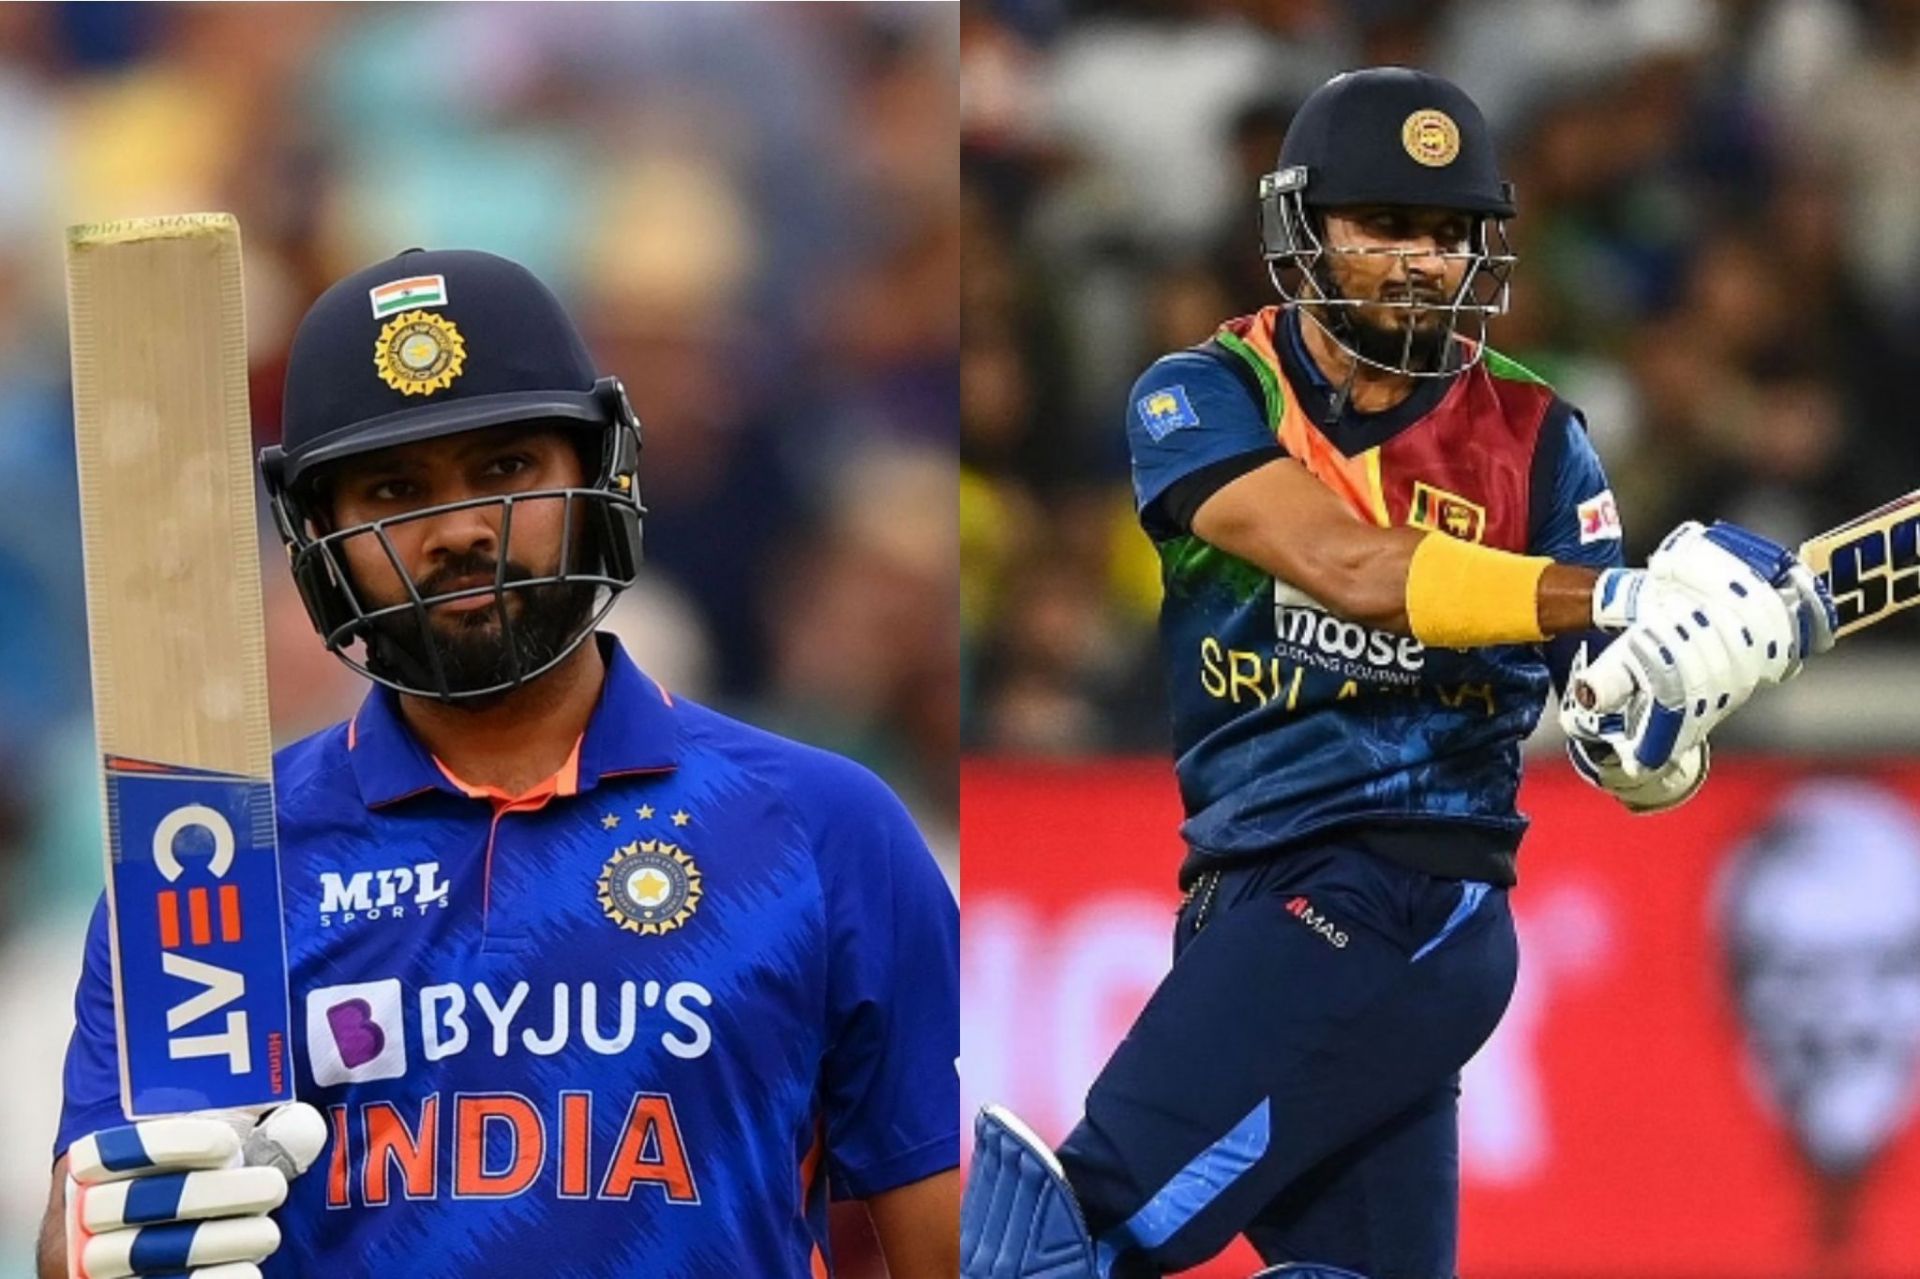 India and Sri Lanka are set to lock horns for the first ODI in Guwahati 